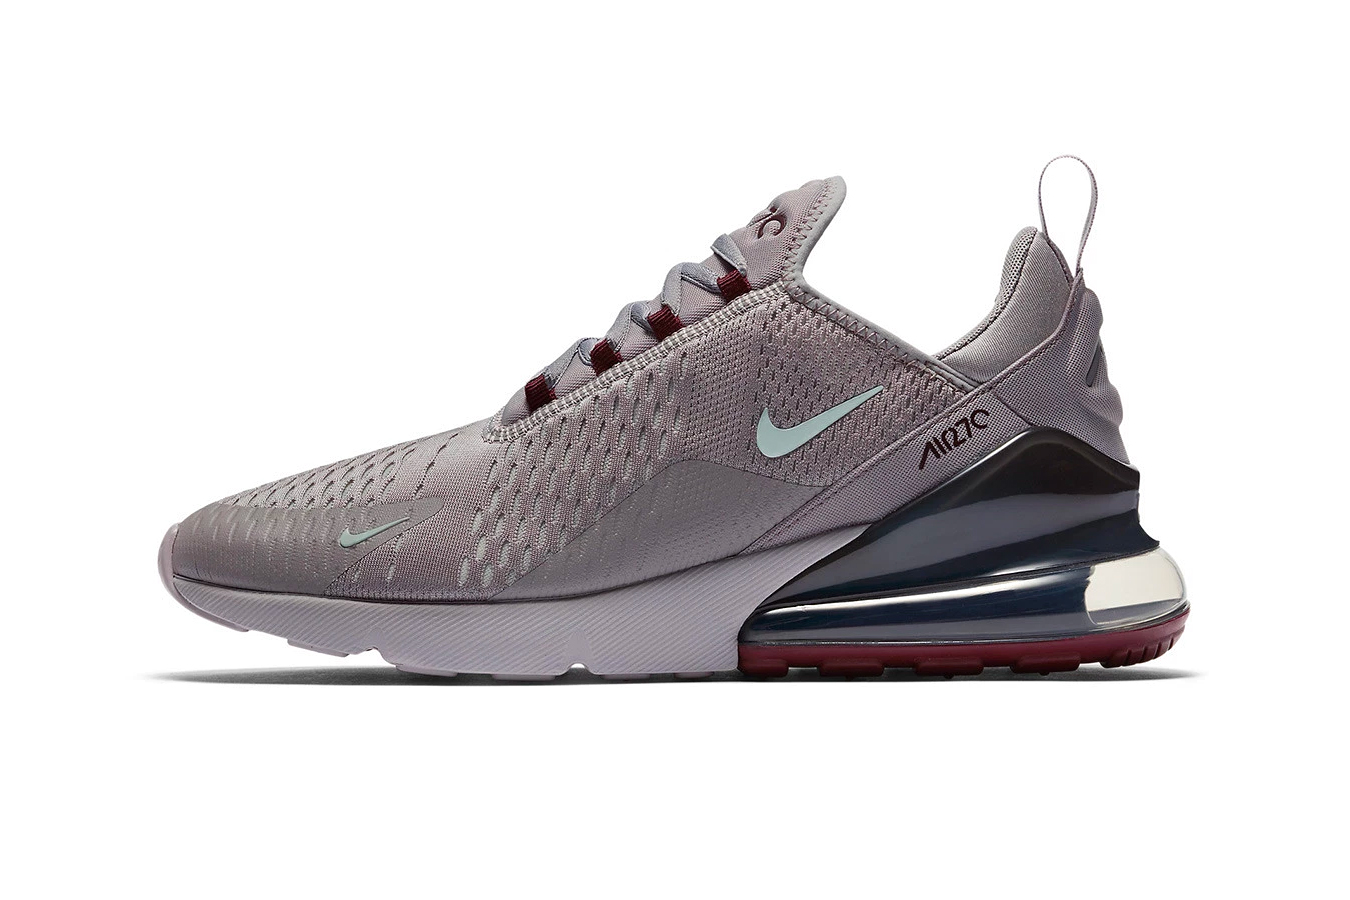 Nike Air Max 270 Burgundy: The Bold and Eye-Catching Sneaker for a Pop of Color